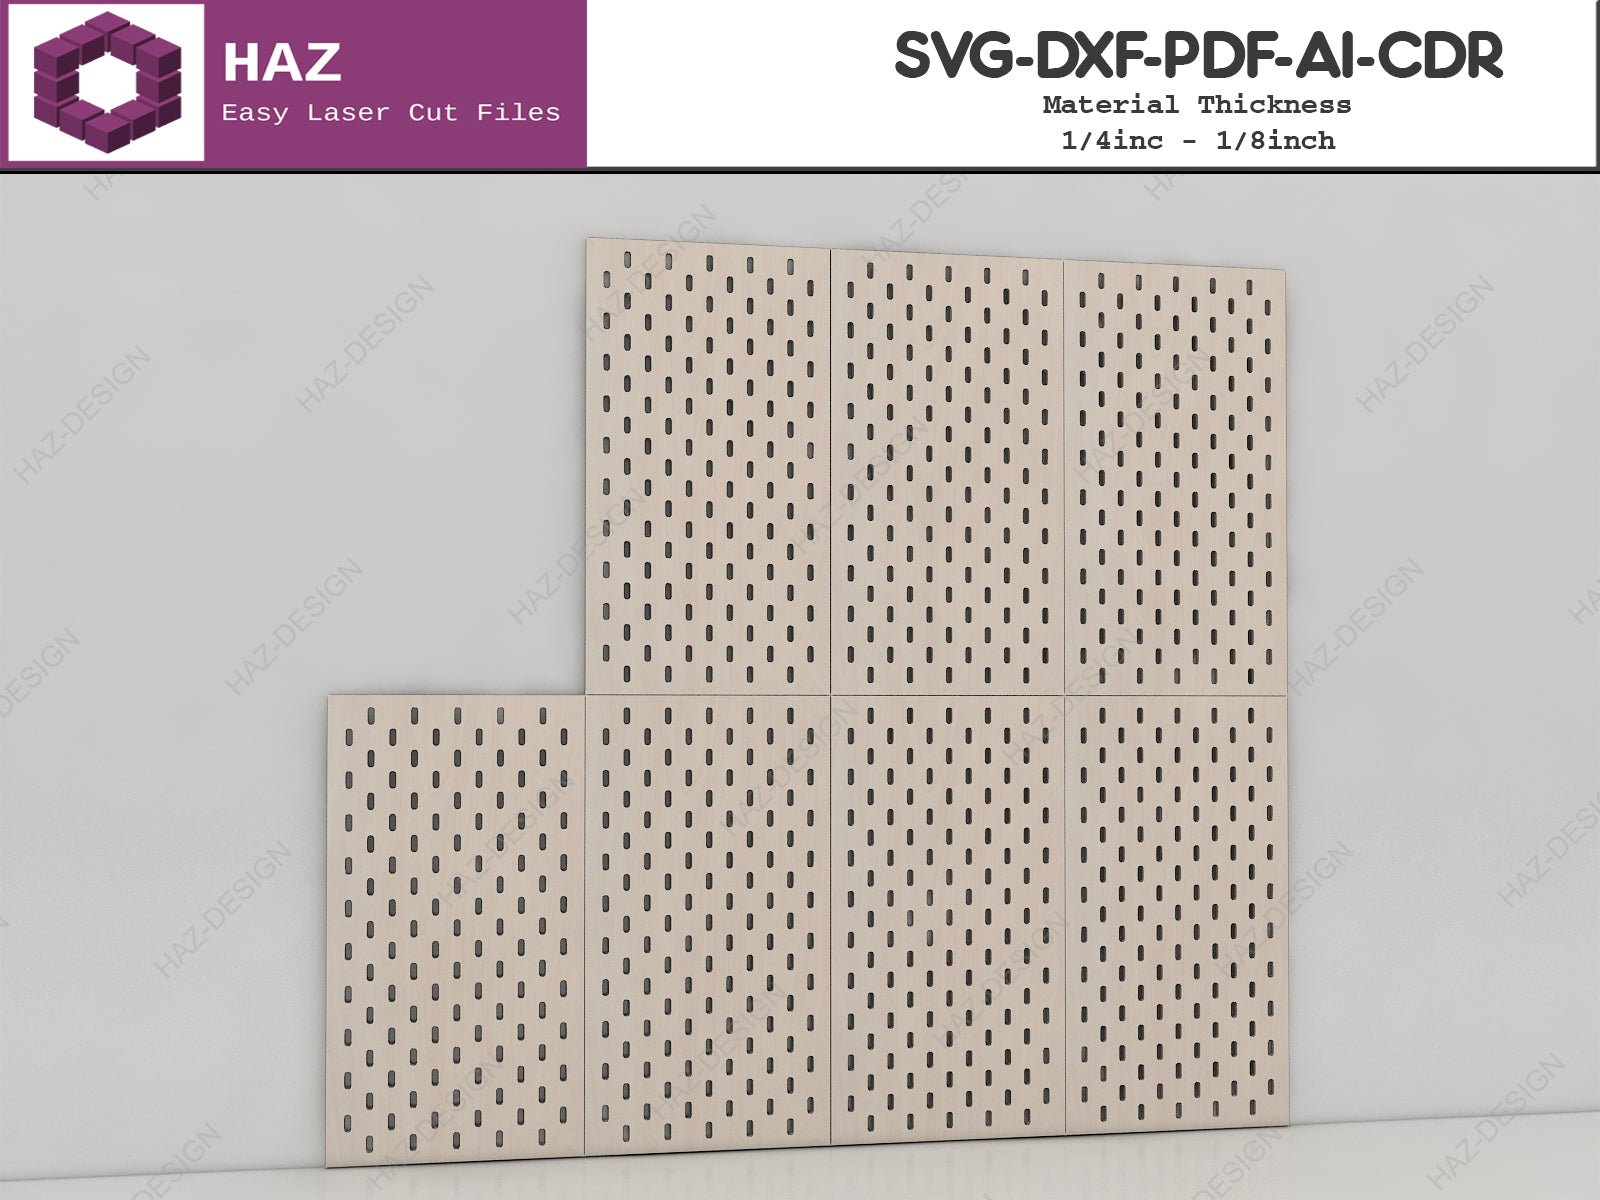 Wood Pegboard Wall Organizer / Hanging Peg board with hooks / Peg Notice Board SVG CDR Ai DXF 084